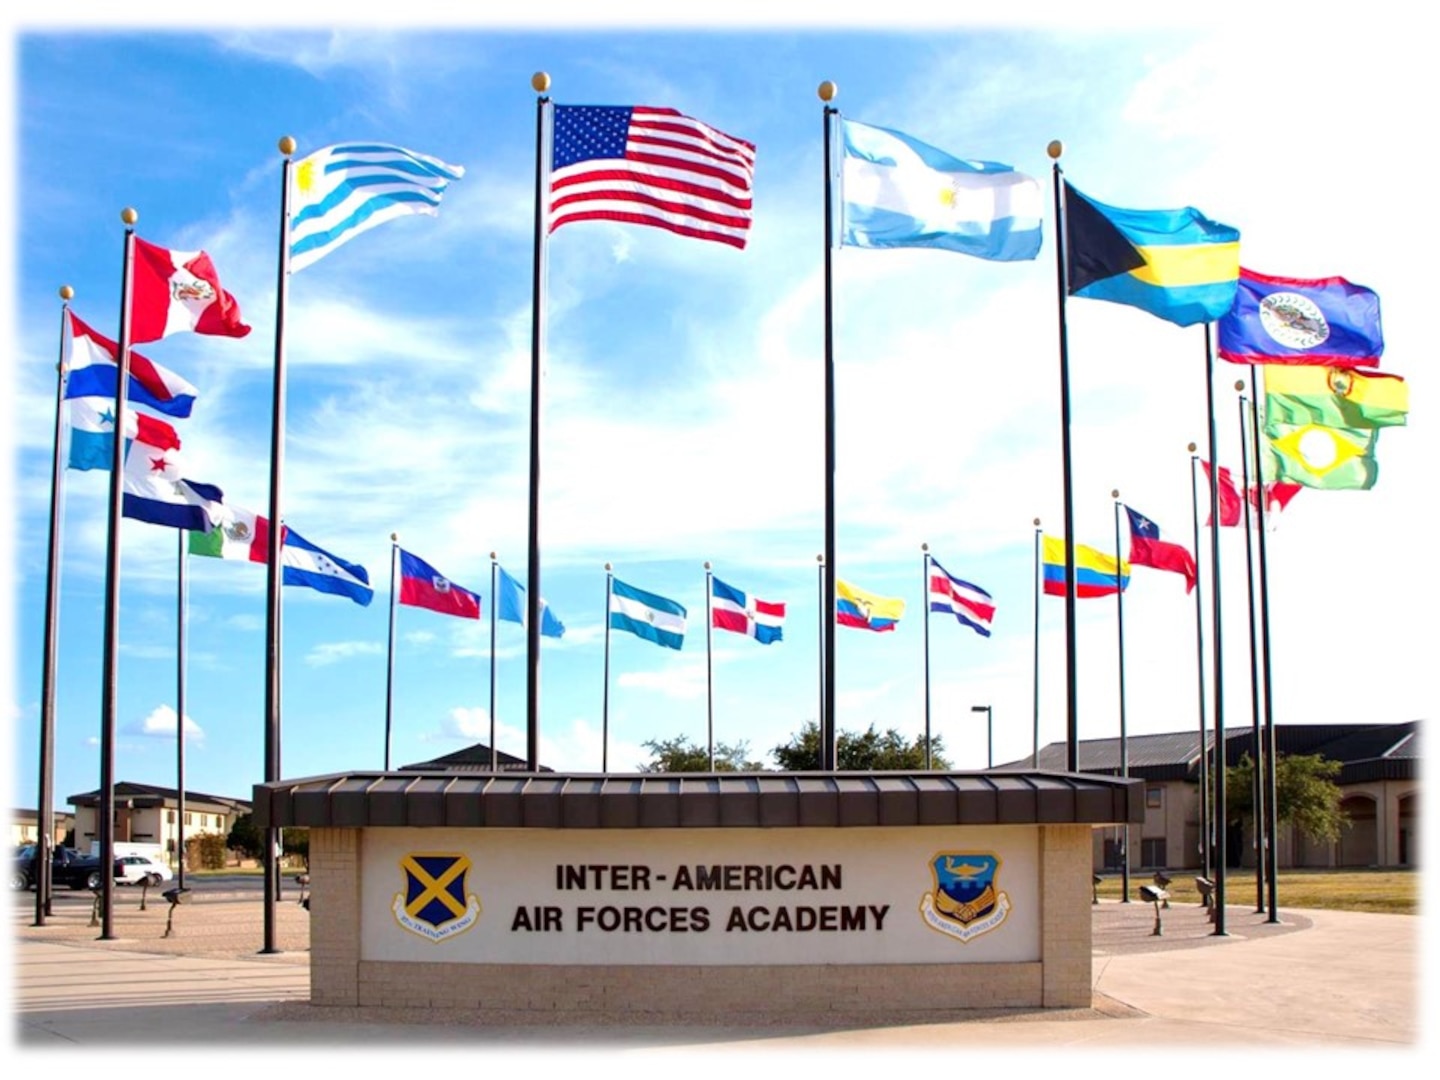 The Inter-American Air Forces Academy at Joint Base San Antonio-Lackland has revamped 15 classrooms with new technology to enhance students’ education experience, which they began using in January 2019 as part of a six-month test. They are the first in the Department of Defense to use this technology.